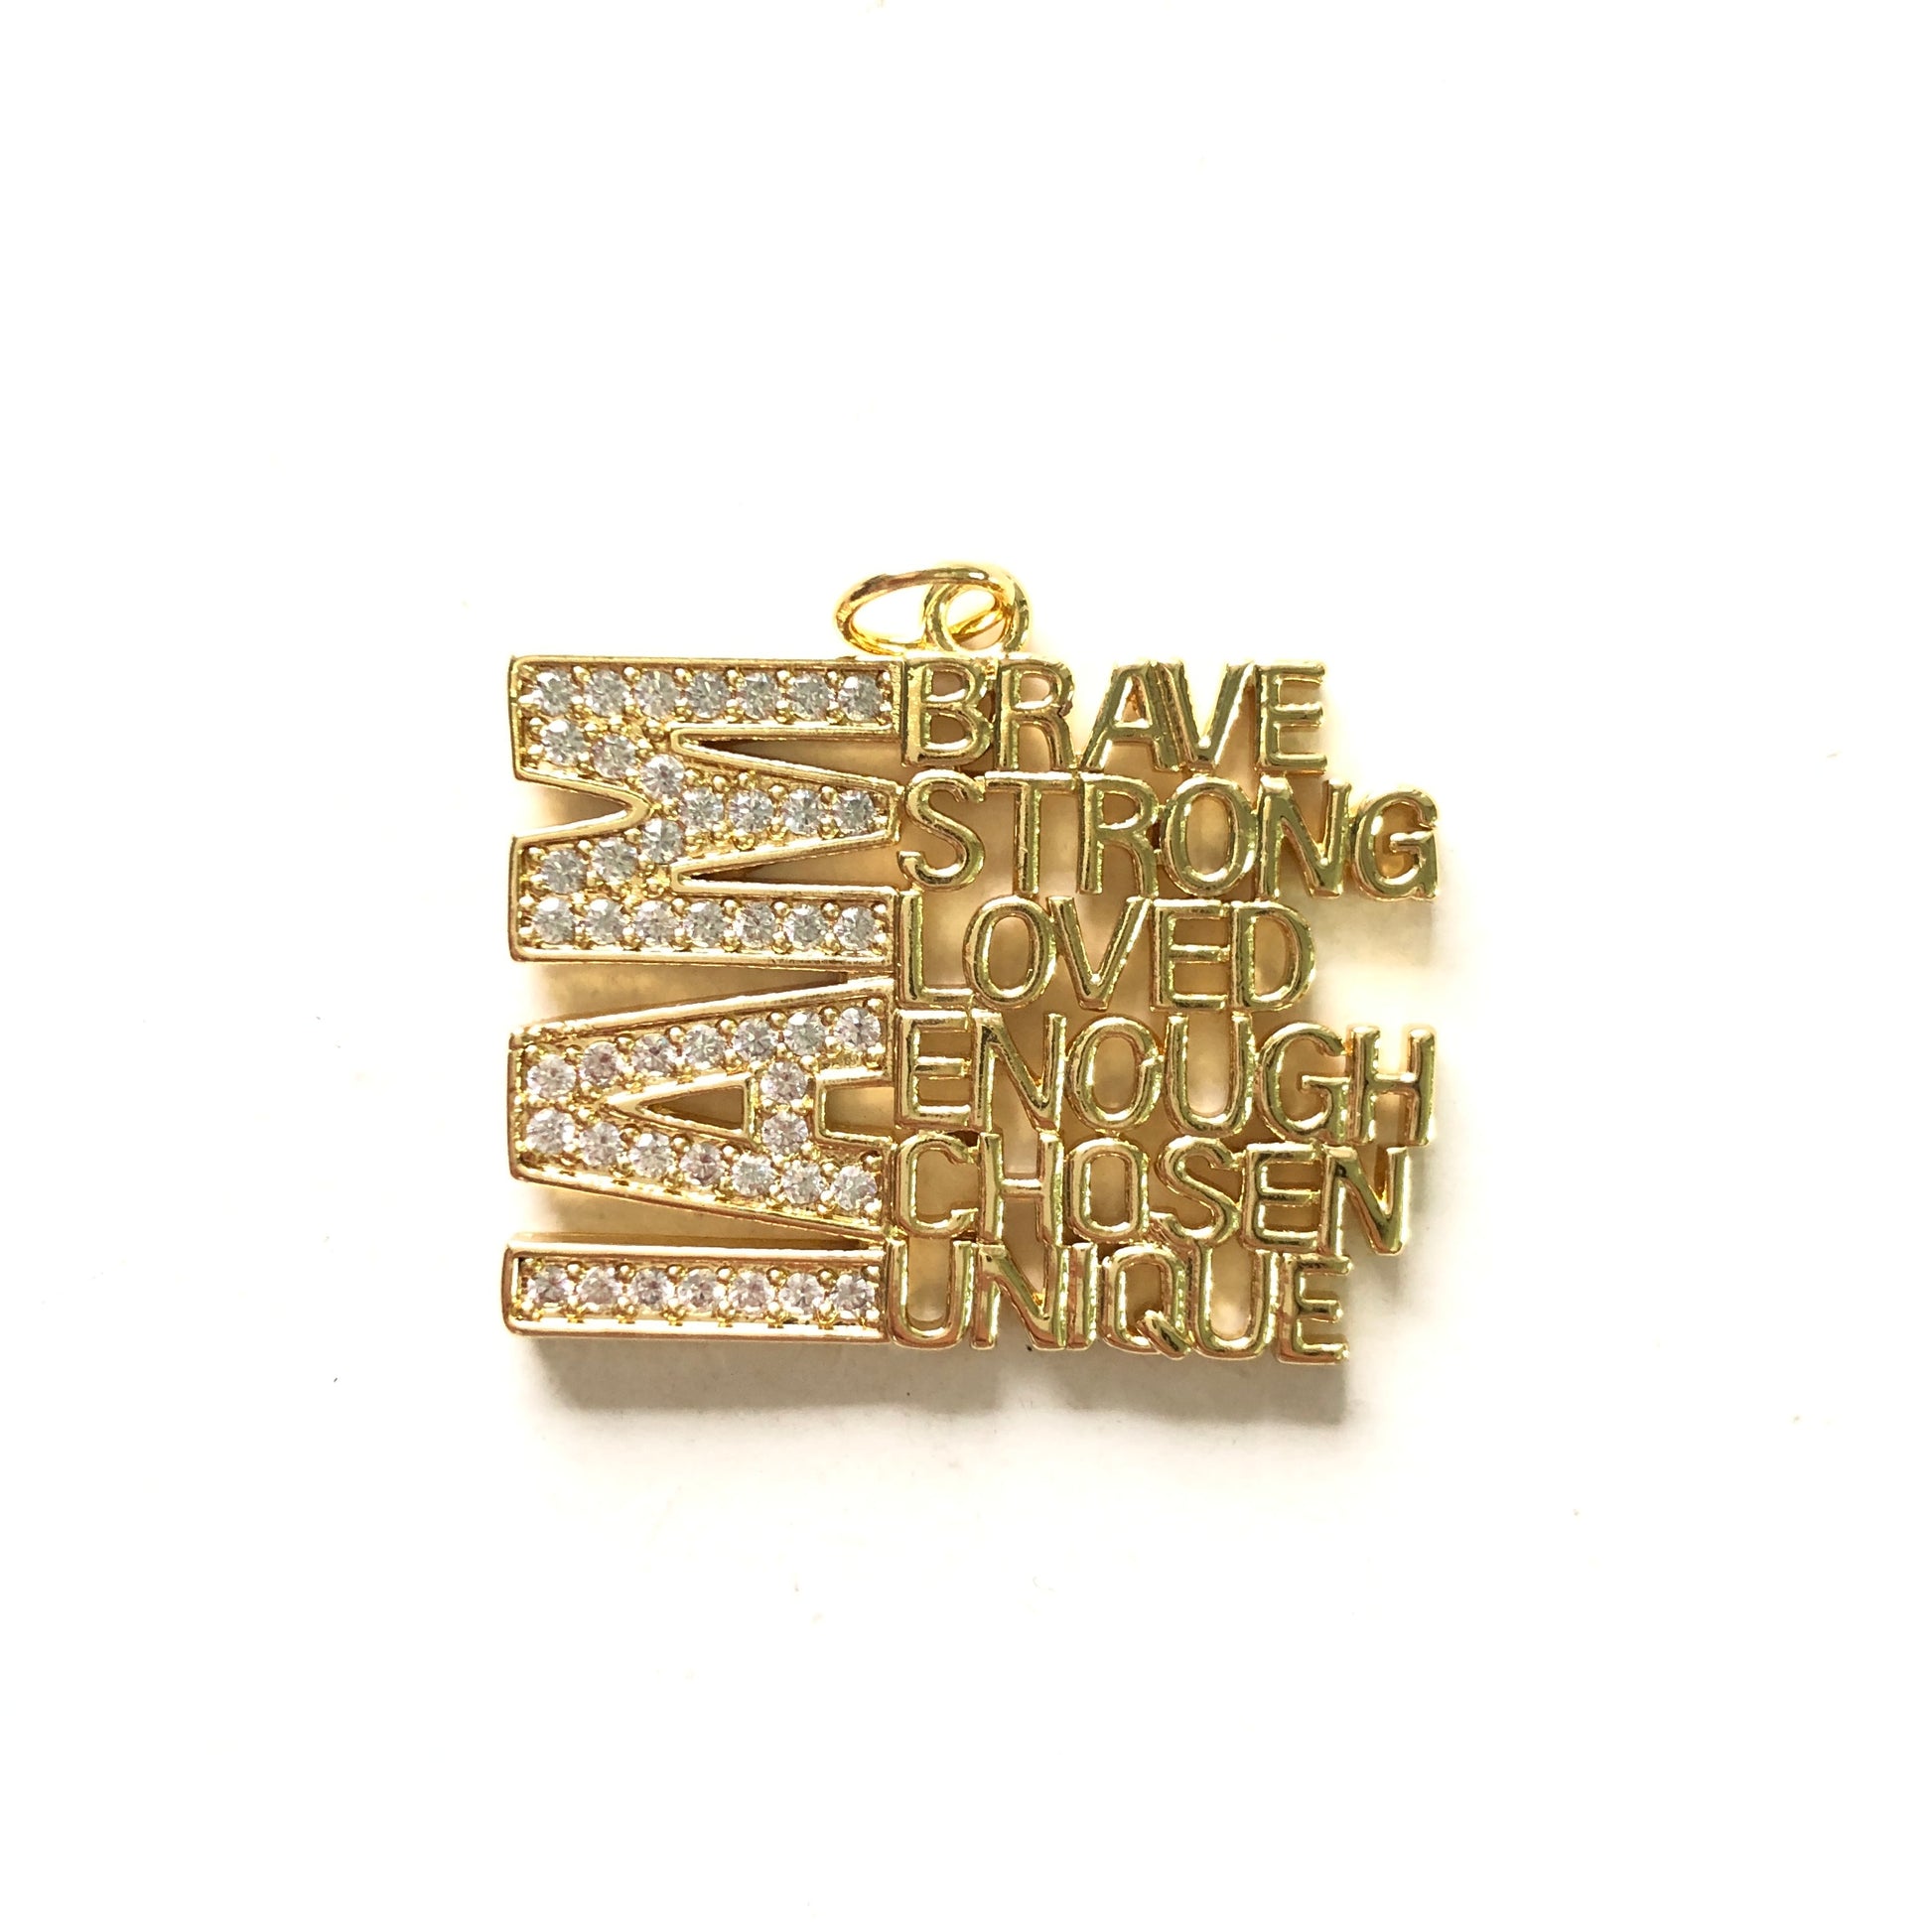 10pcs/lot CZ I Am Brave Strong Loved Enough Chosen Unique Word Charms Gold CZ Paved Charms New Charms Arrivals Words & Quotes Charms Beads Beyond